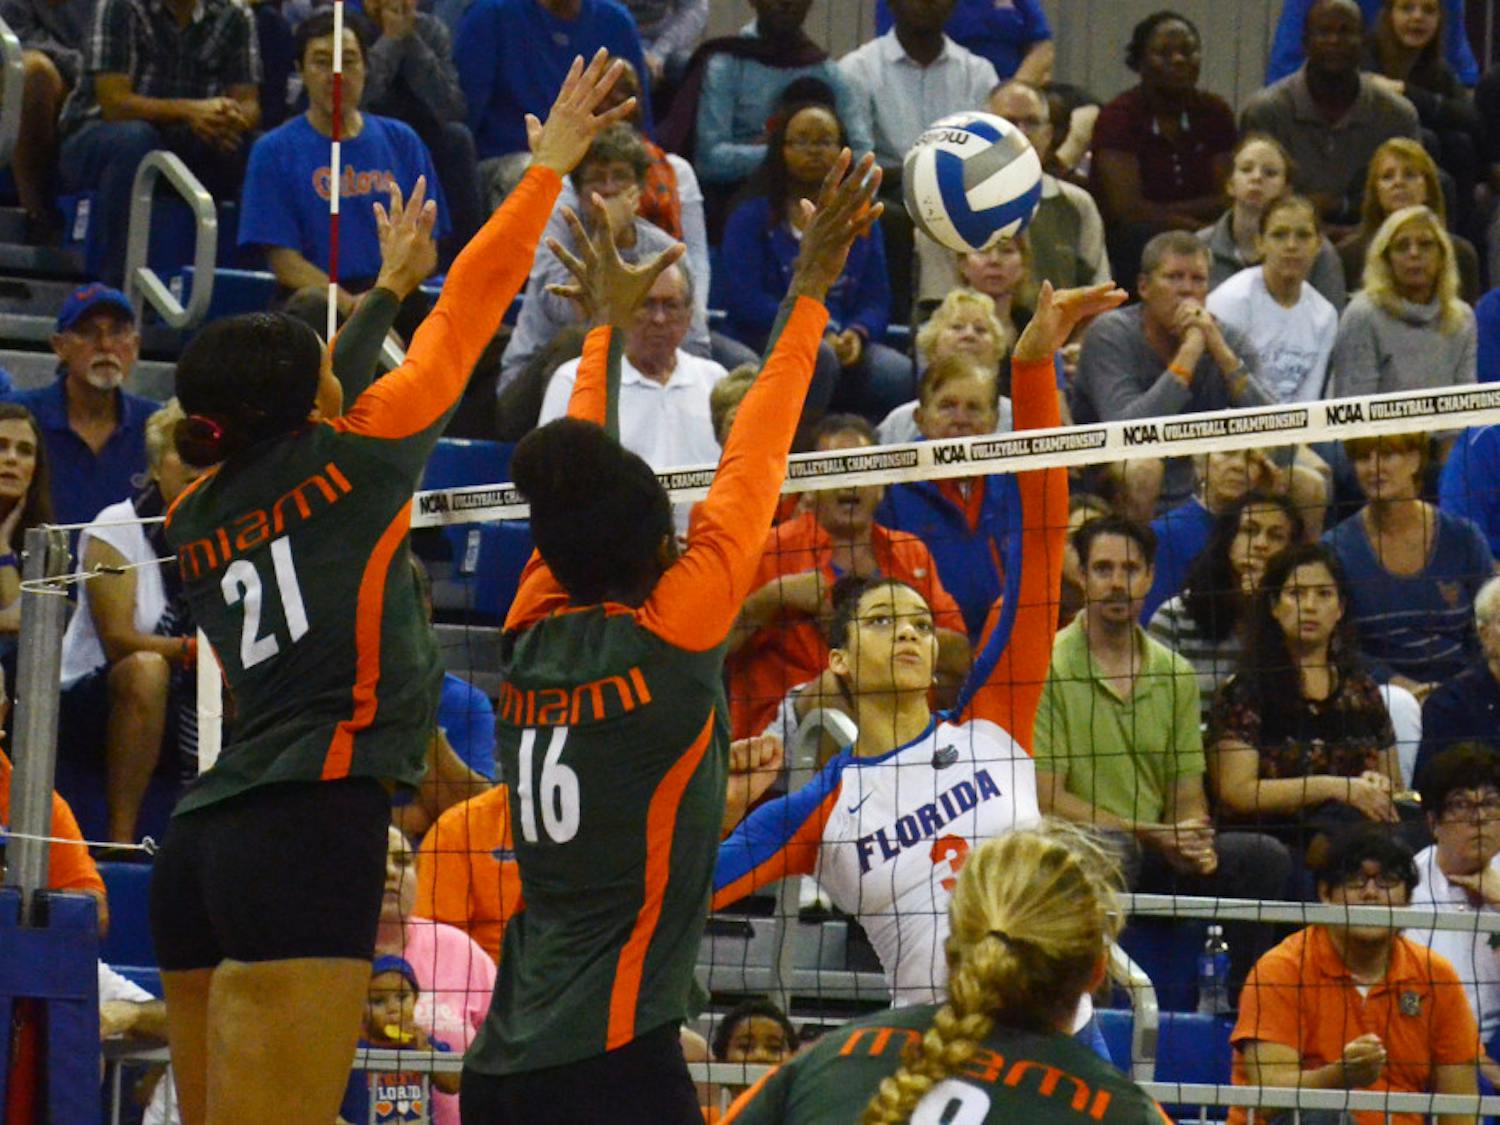 Sophomore right-side hitter Alex Holston swings for a kill attempt during No. 8 seed Florida's 3-1 win against Miami in the second round of the NCAA Tournaent on Saturday in the O'Connell Center.